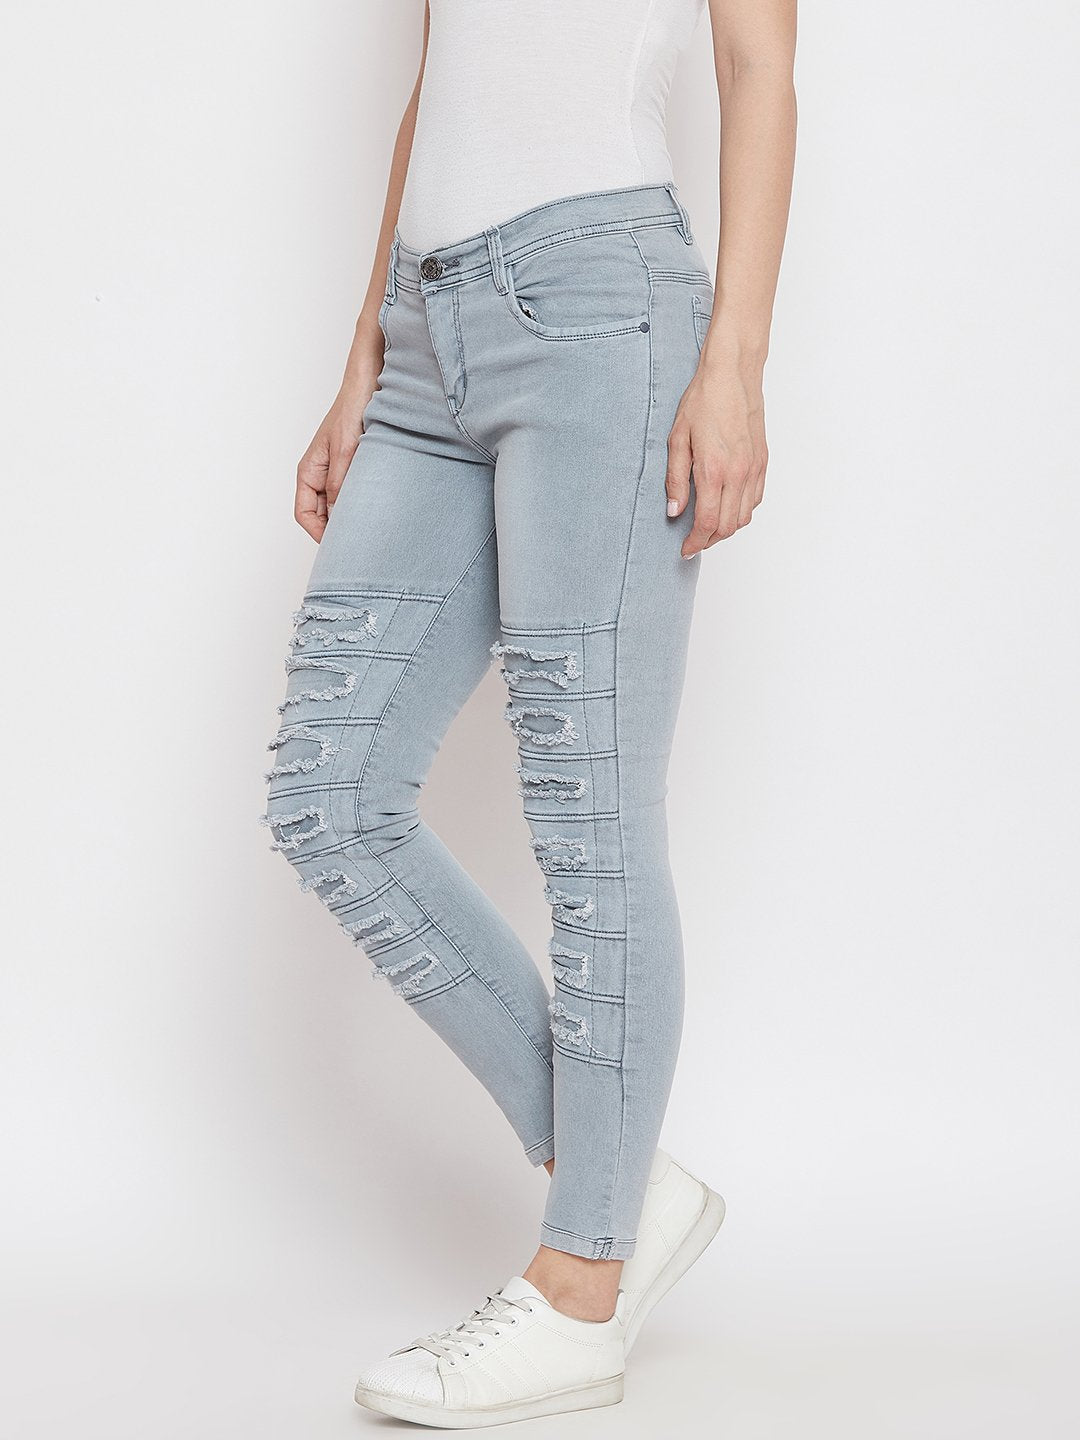 Distressed Stretchable Grey Jeans - NiftyJeans